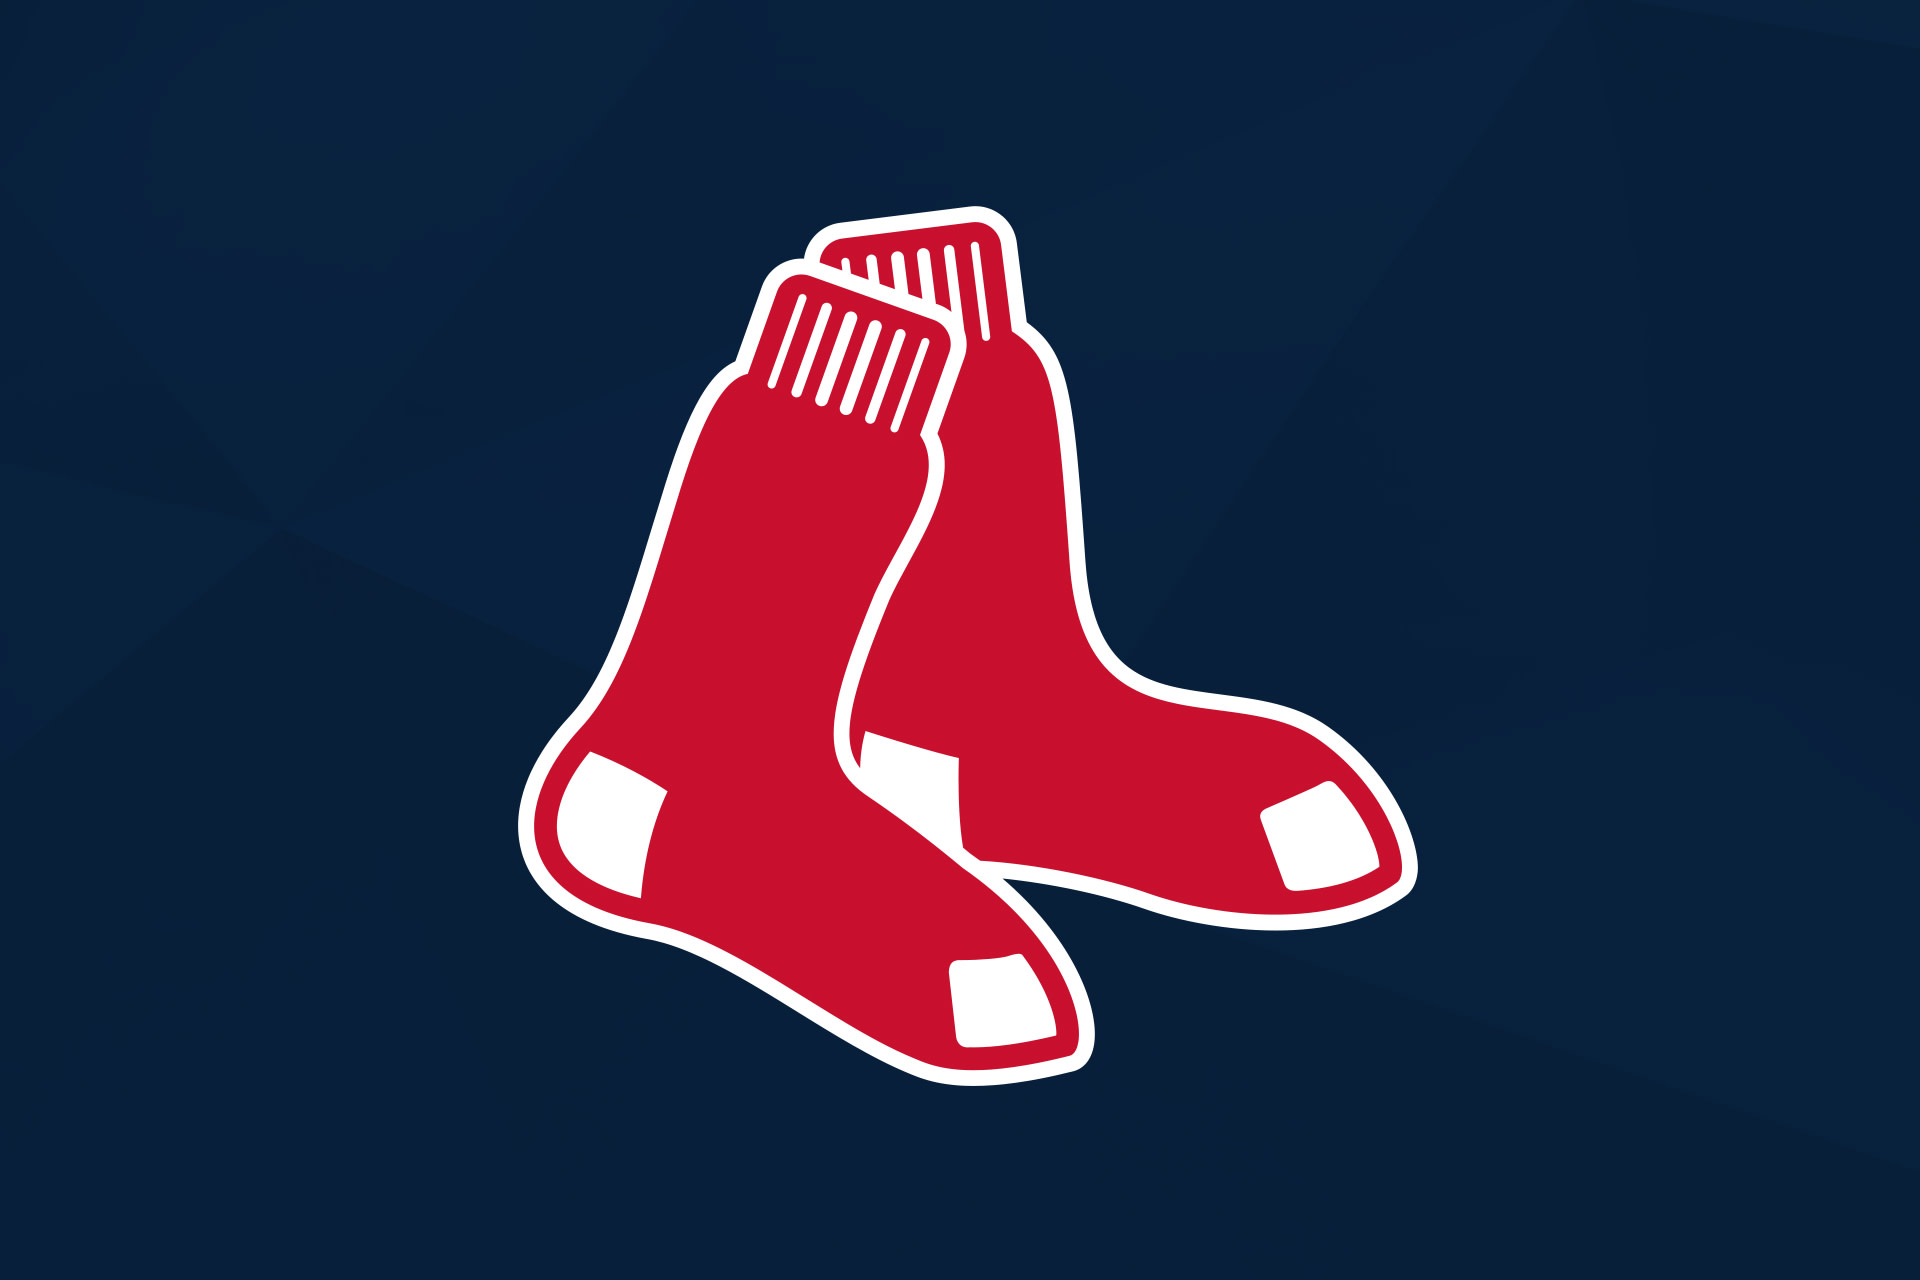 Boston Red Sox - You officially need to update your wallpaper!